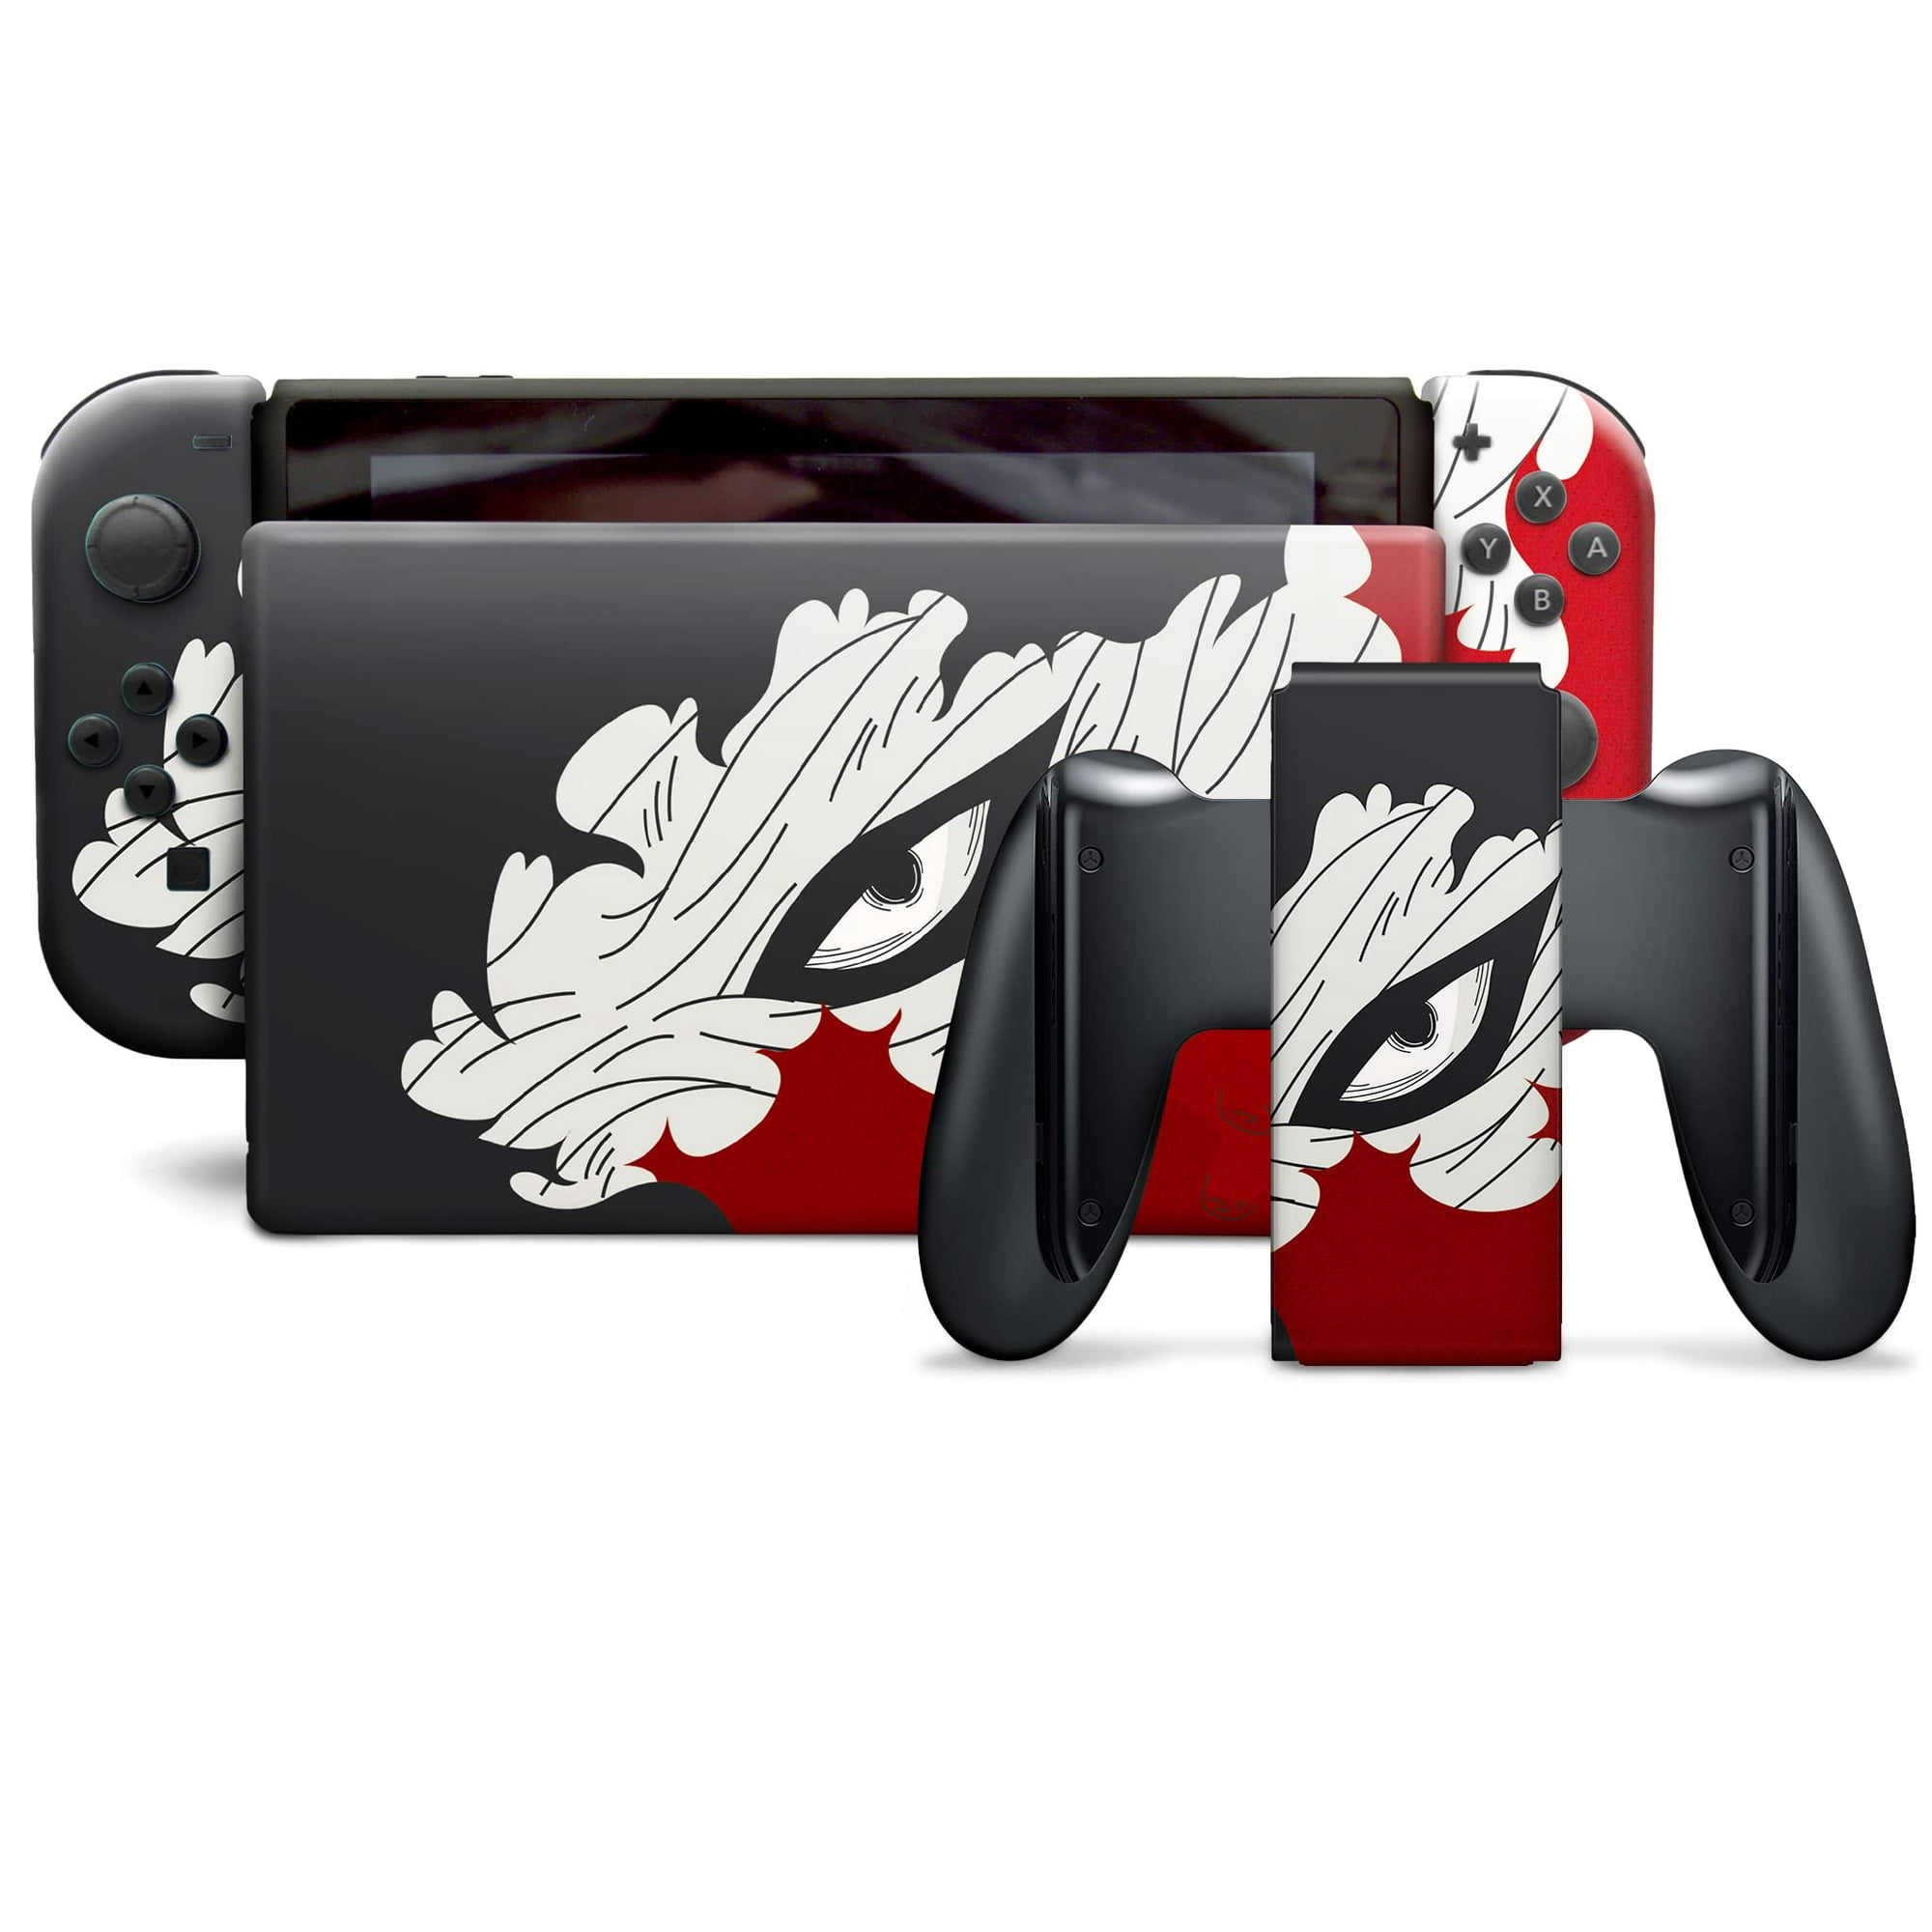 Nintendo Switch Limited Edition Customized in USA I Comes with All Original Nintendo  Switch Accessories | Proudly Customized with Advanced Permanent Hydro-Dip  Technology (Not Just a Skin) | Walmart Canada